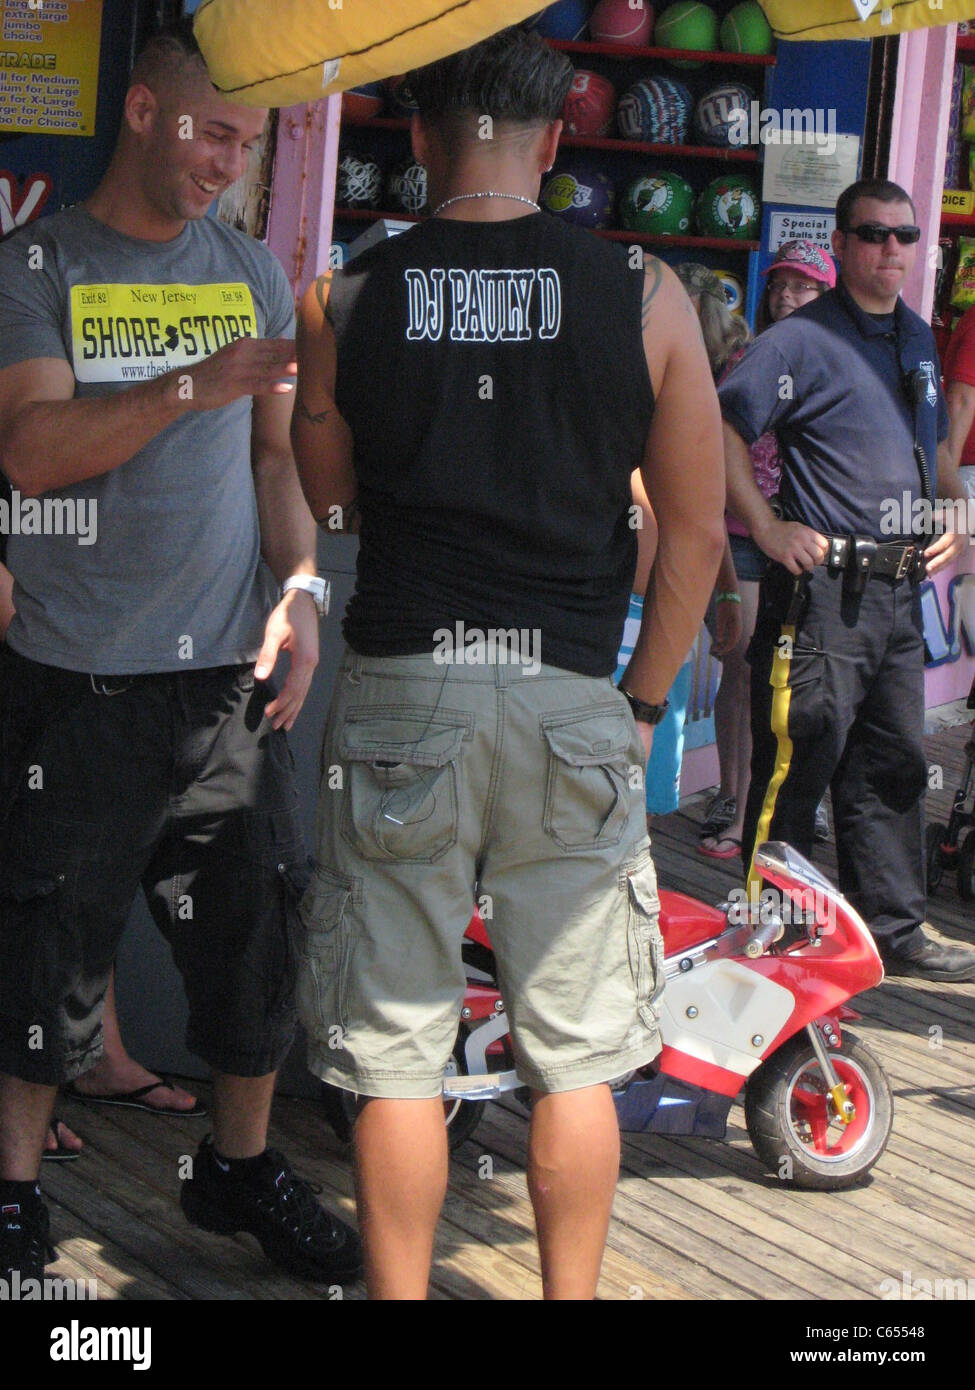 Paul Delvecchio, aka DJ Pauly D, Deena Nicole Cortese, Michael Sorrentino, aka The Situation out and about for JERSEY SHORE Season Two Celebrity Candids - FRI, the boardwalk, Seaside Heights, NJ August 20, 2010. Photo By: Doug Fallone/Everett Collection Stock Photo